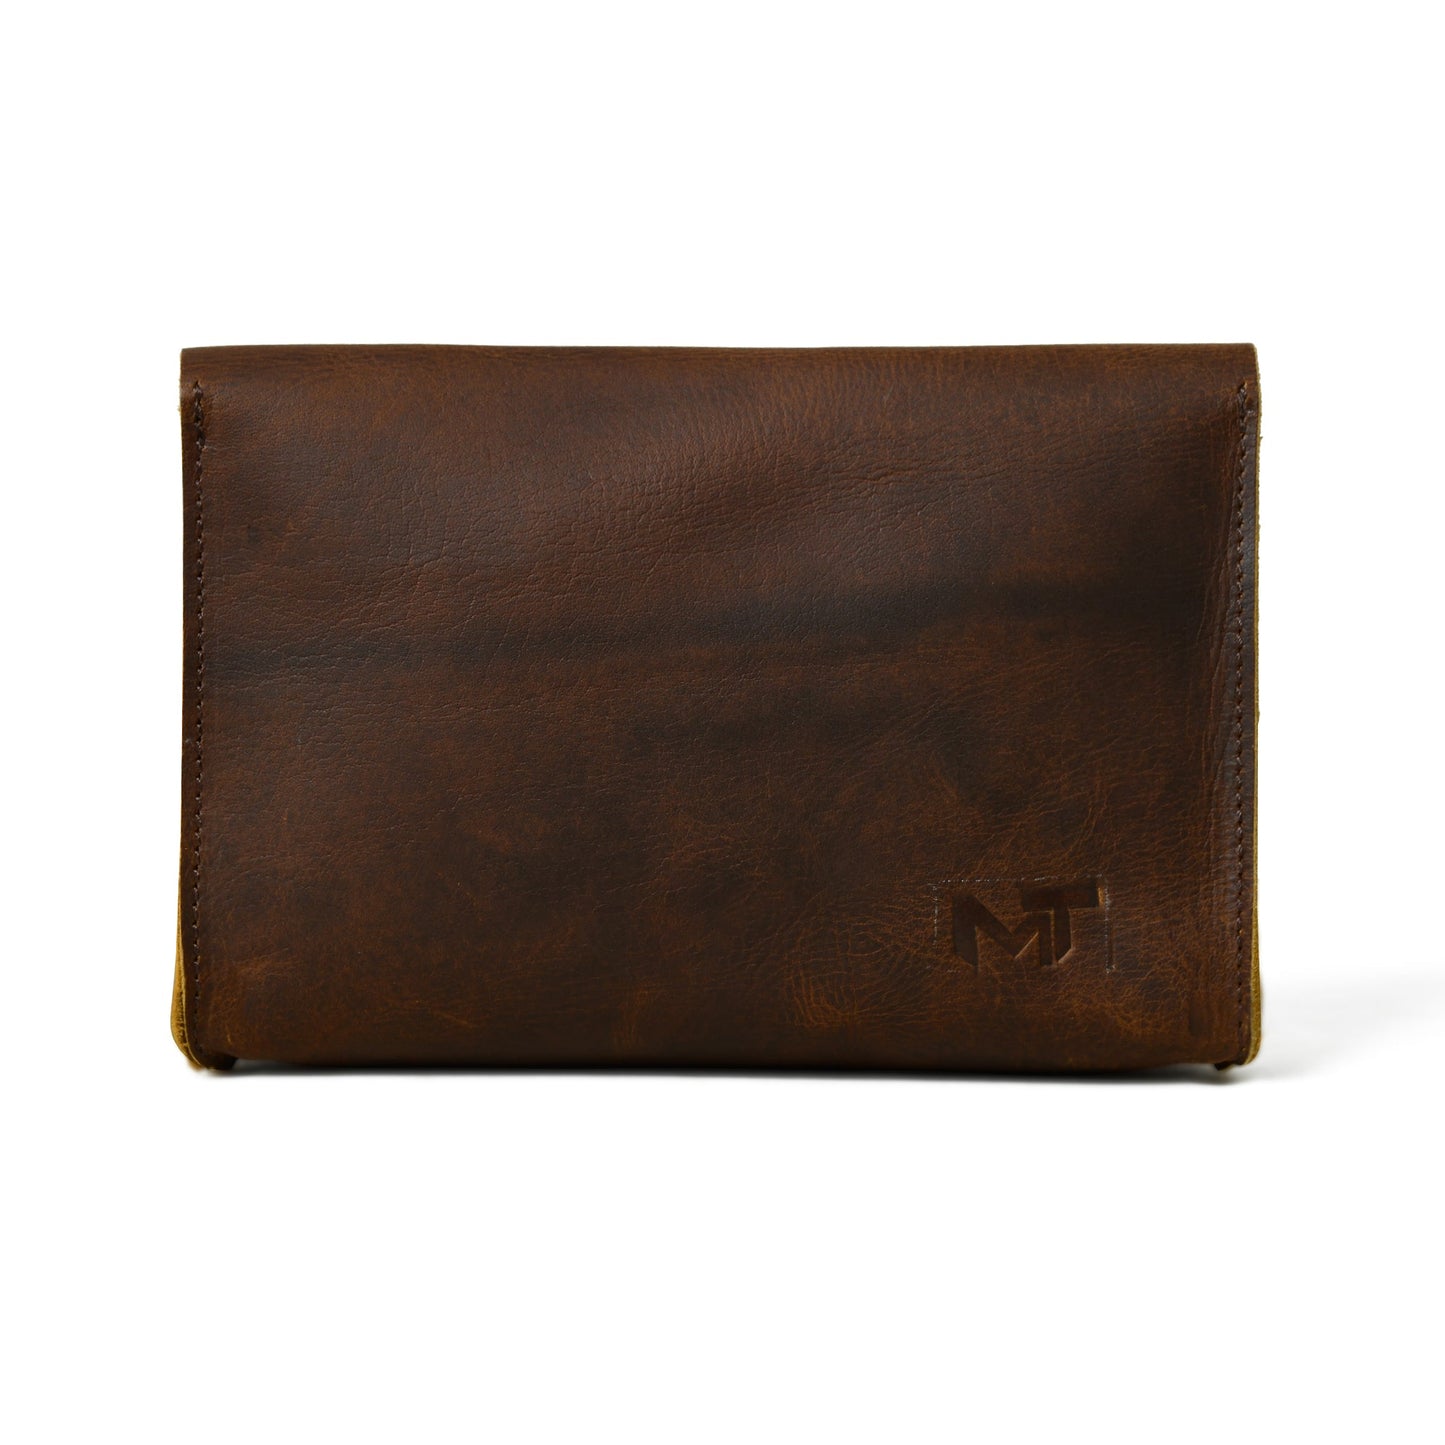 Chic Cocoa Leather Women's Clutch - The Tool Store